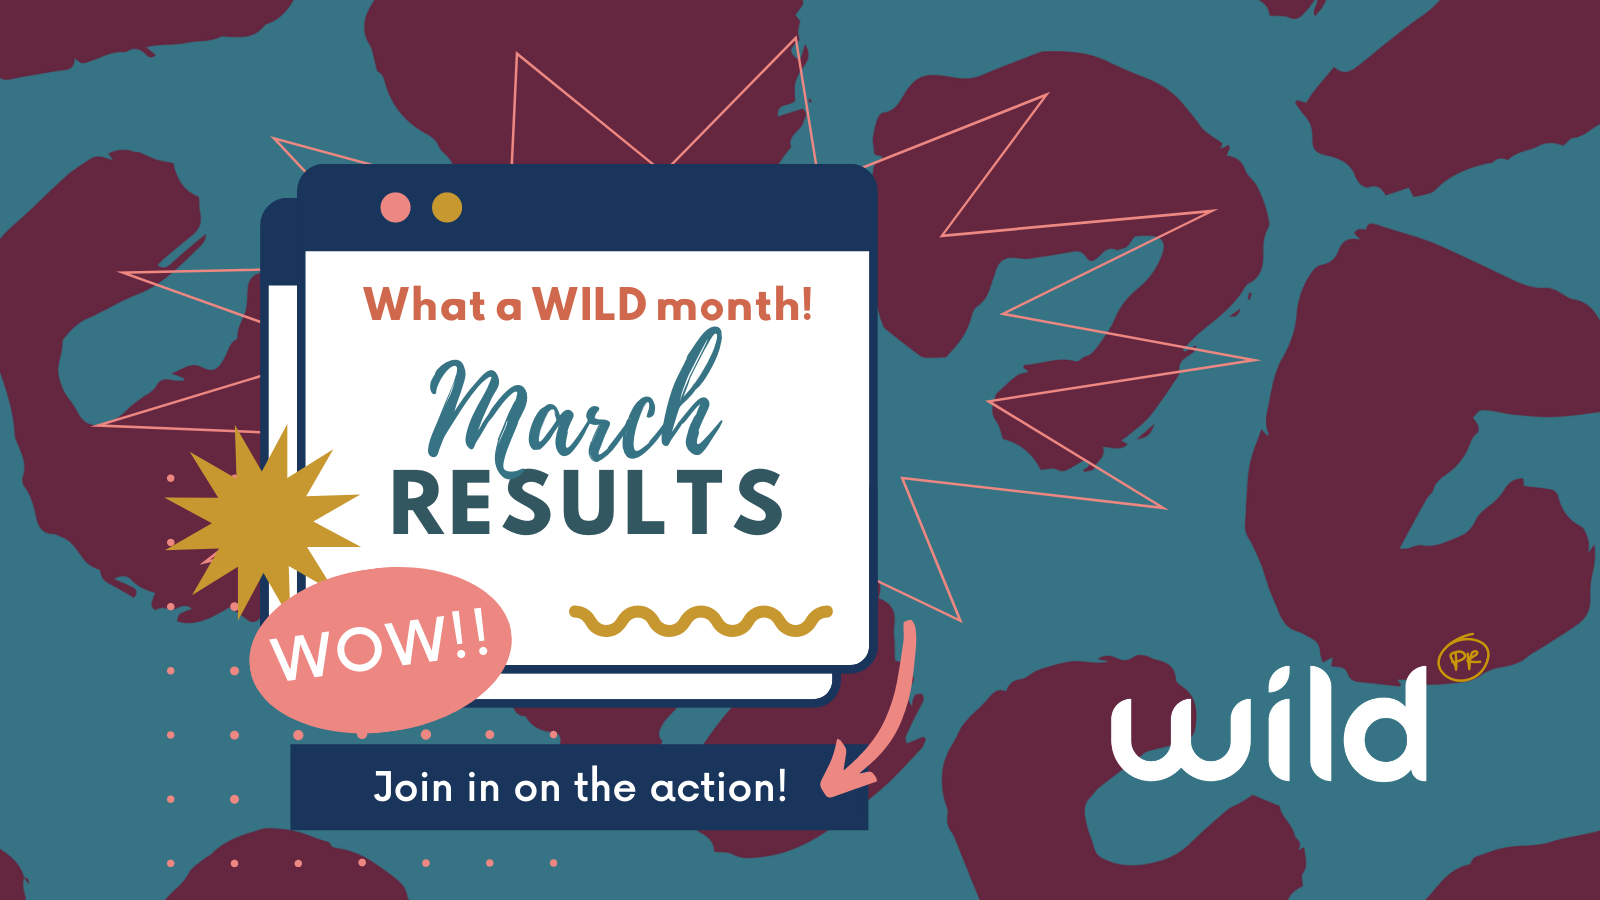 What a WILD month March was!